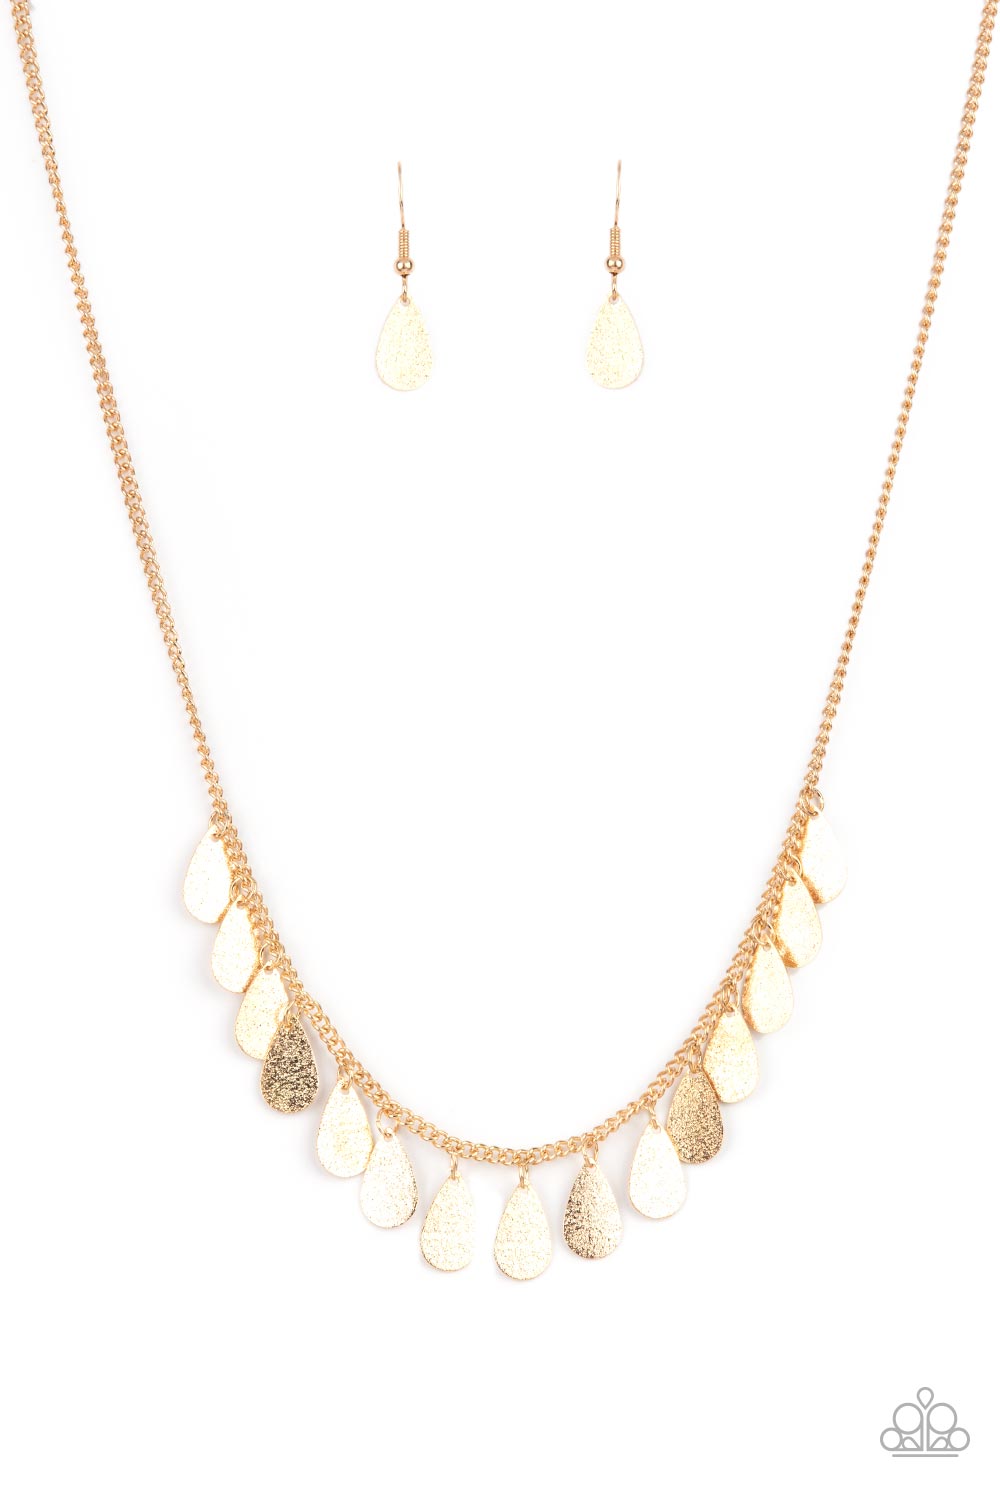 Eastern CHIME Zone - Gold Paparazzi Necklace (#2030)